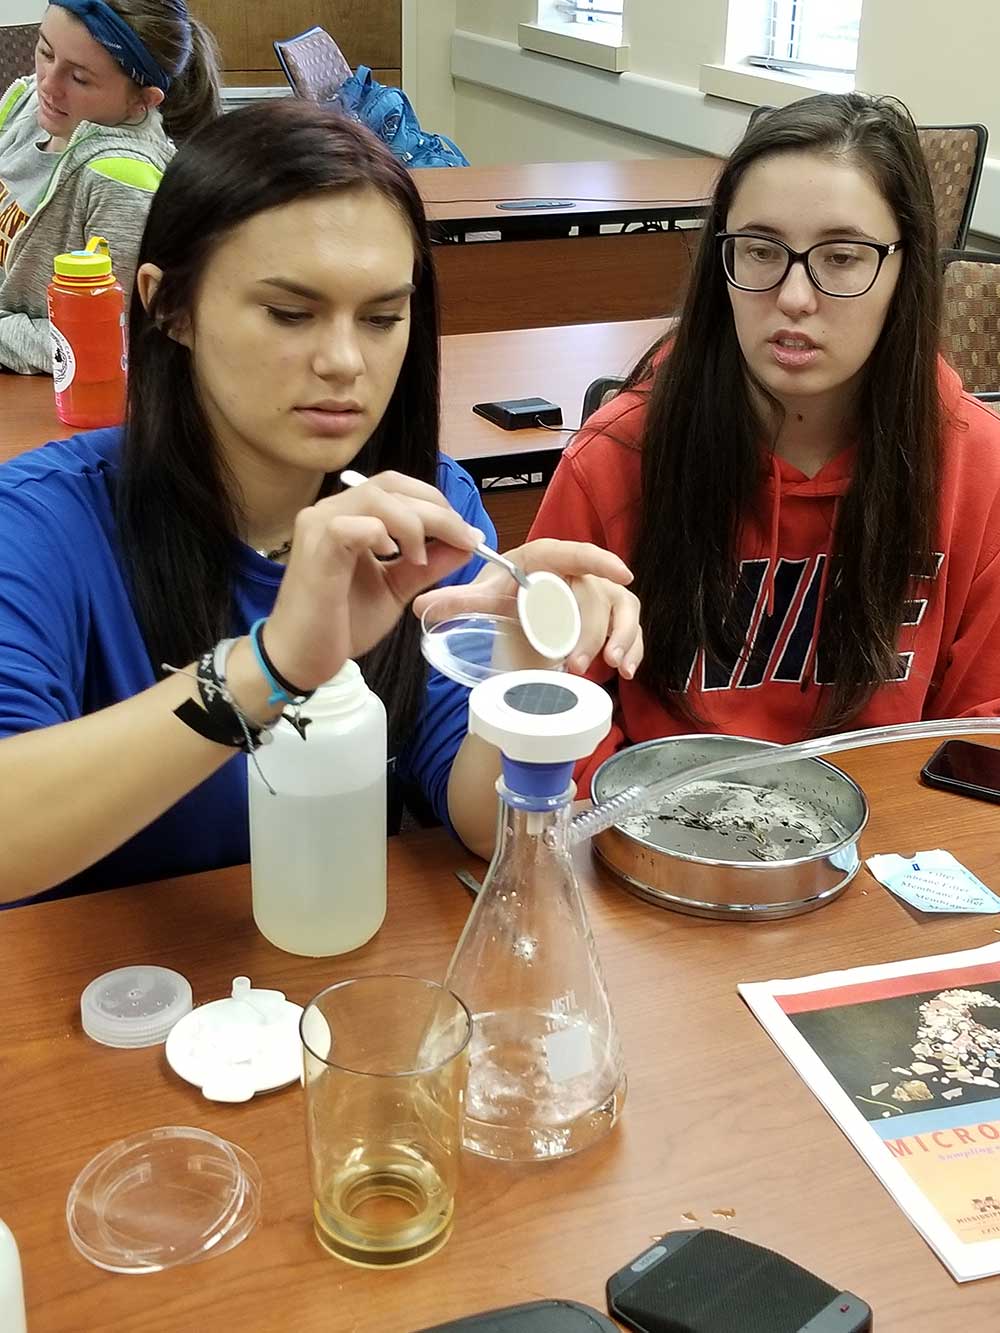 nterns analyzing microplastics as part of Student Master Naturalist Program. Two students work with science materials (beaker, etc. at a table)